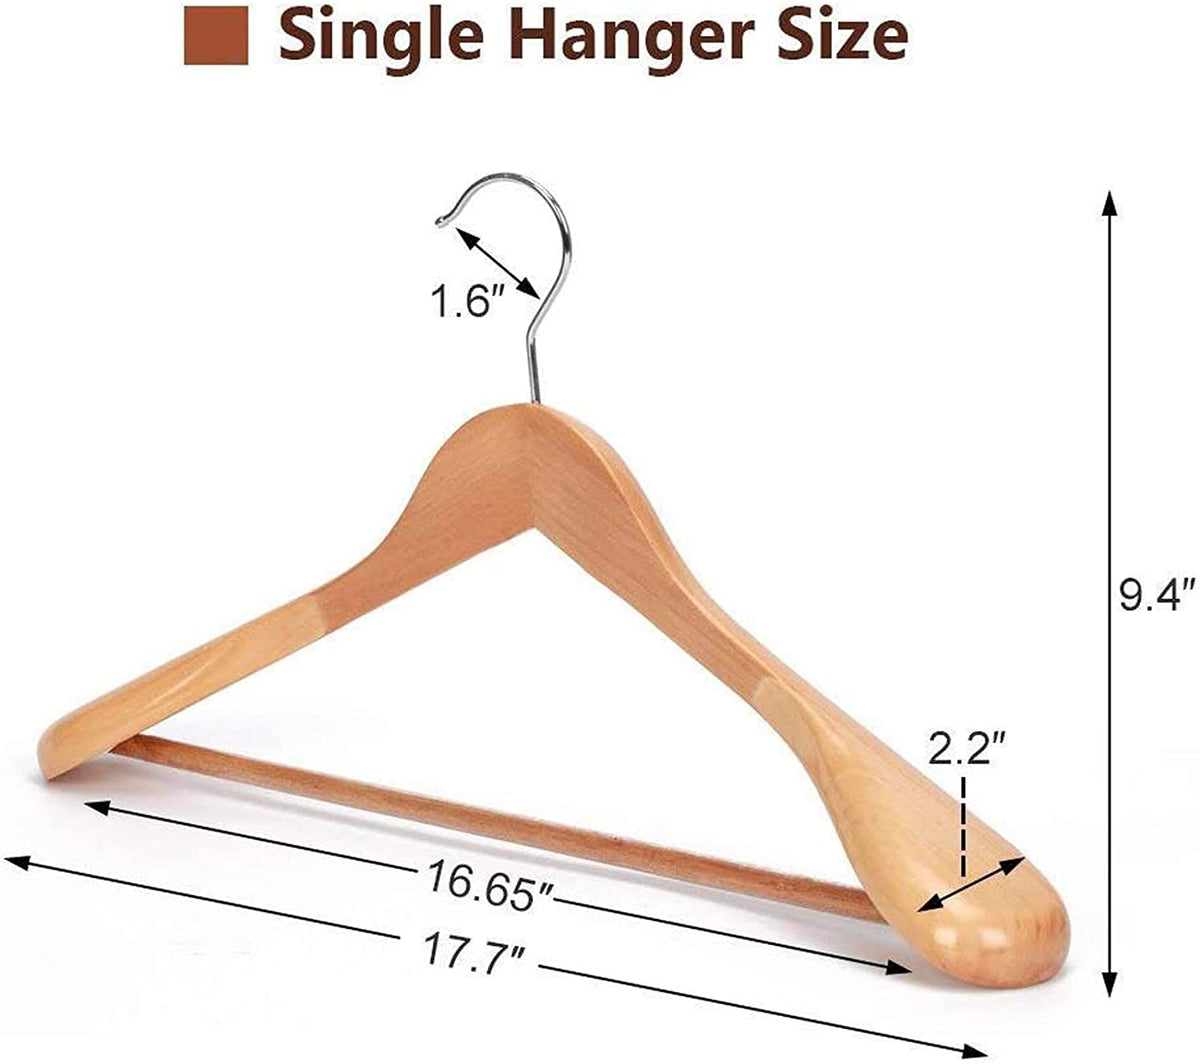 Wooden Suit Hangers - Premium Gugertree Non-Slip Pant Bar & Chrome Swivel Hook for Clothes